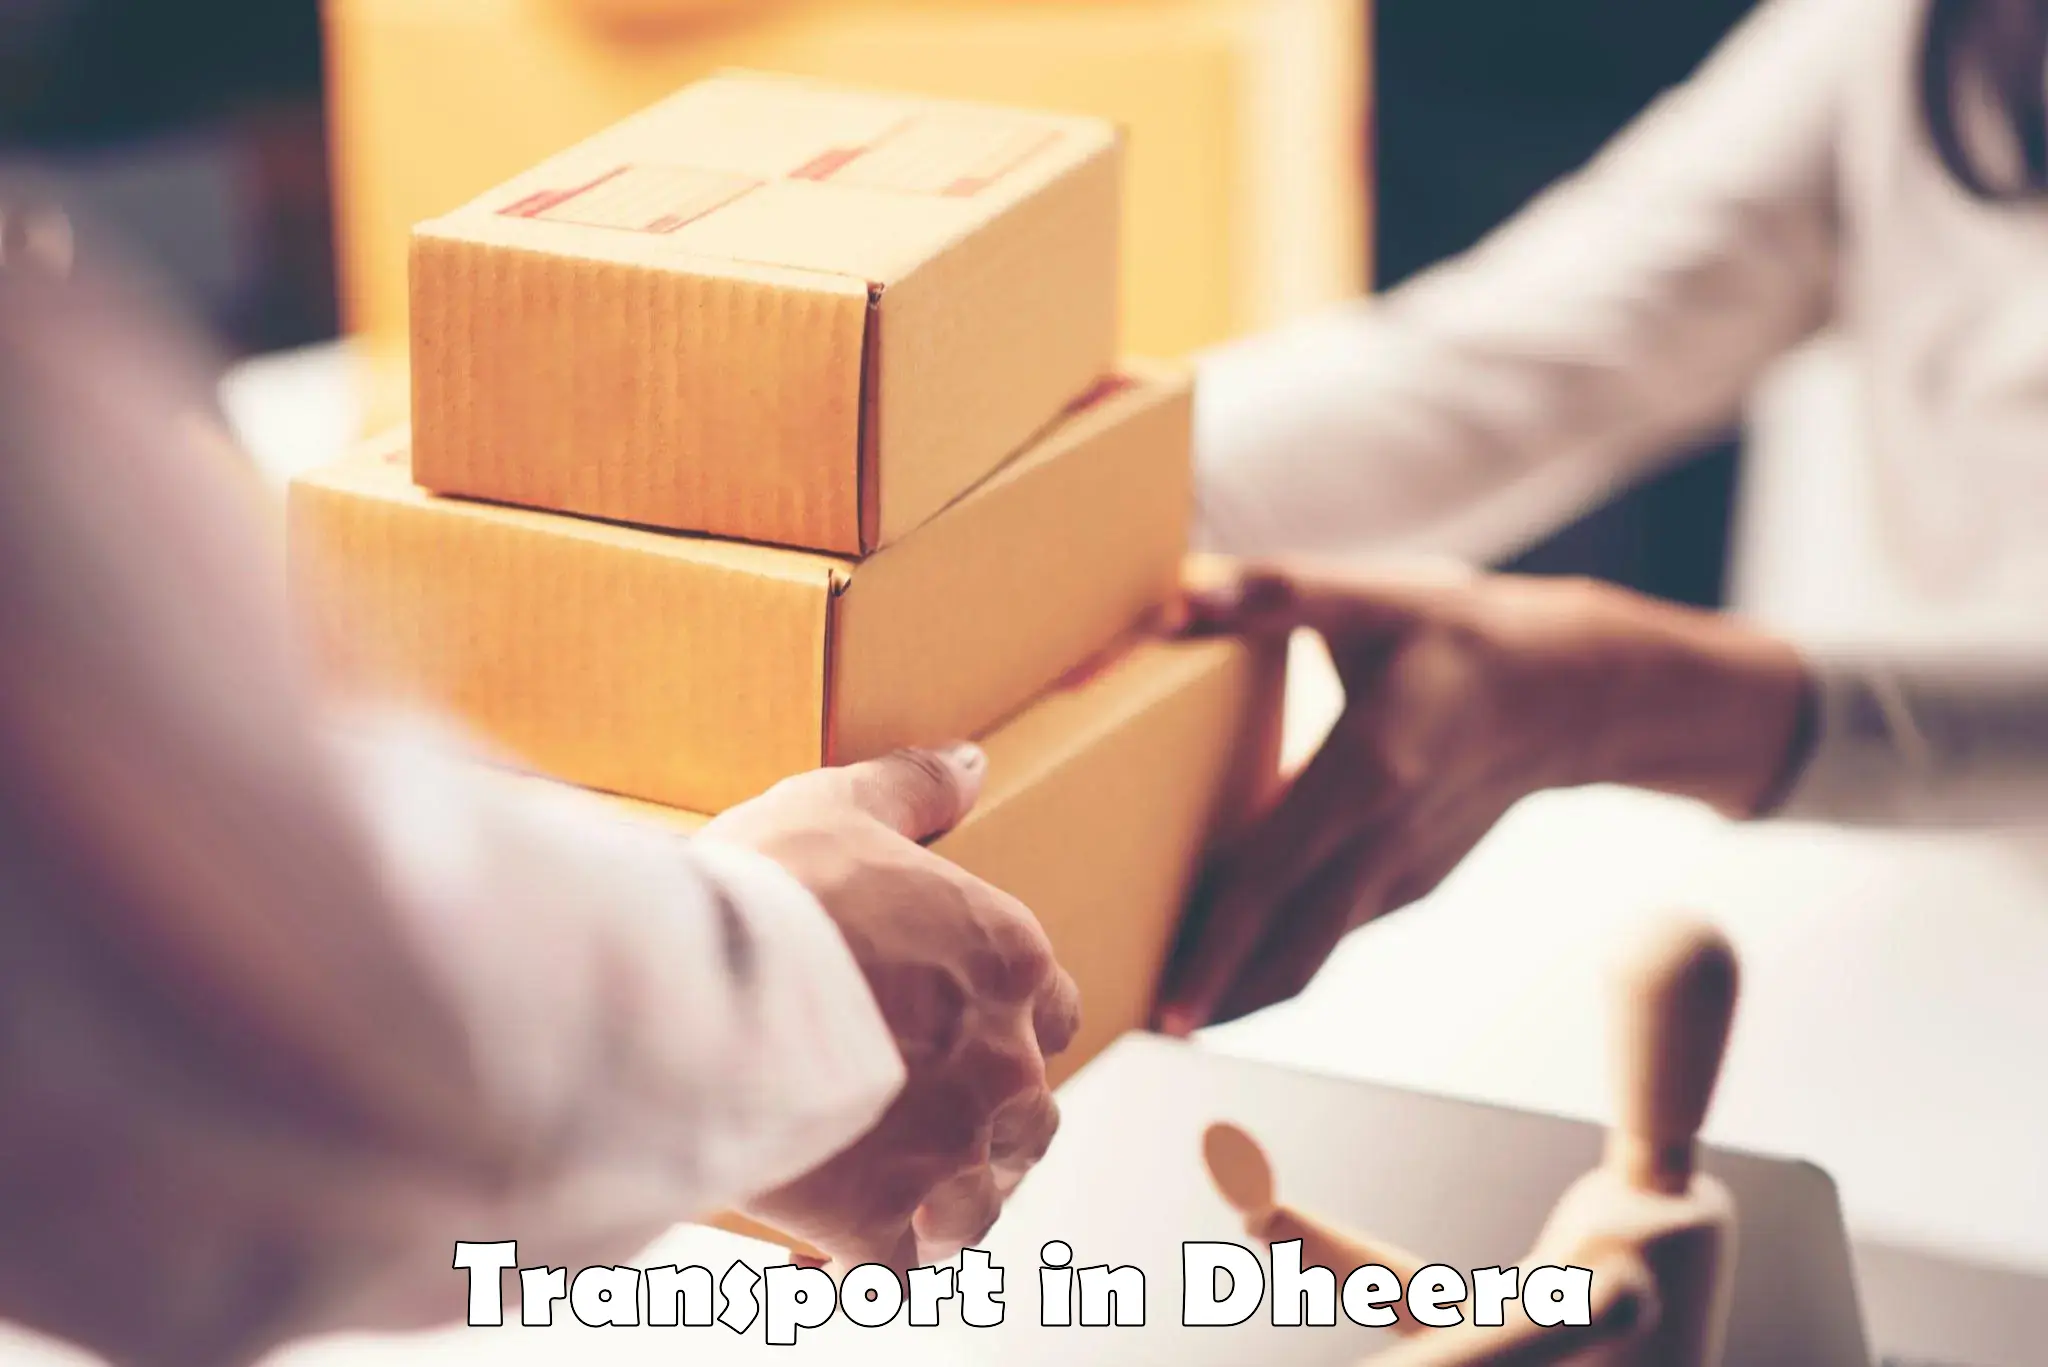 Commercial transport service in Dheera